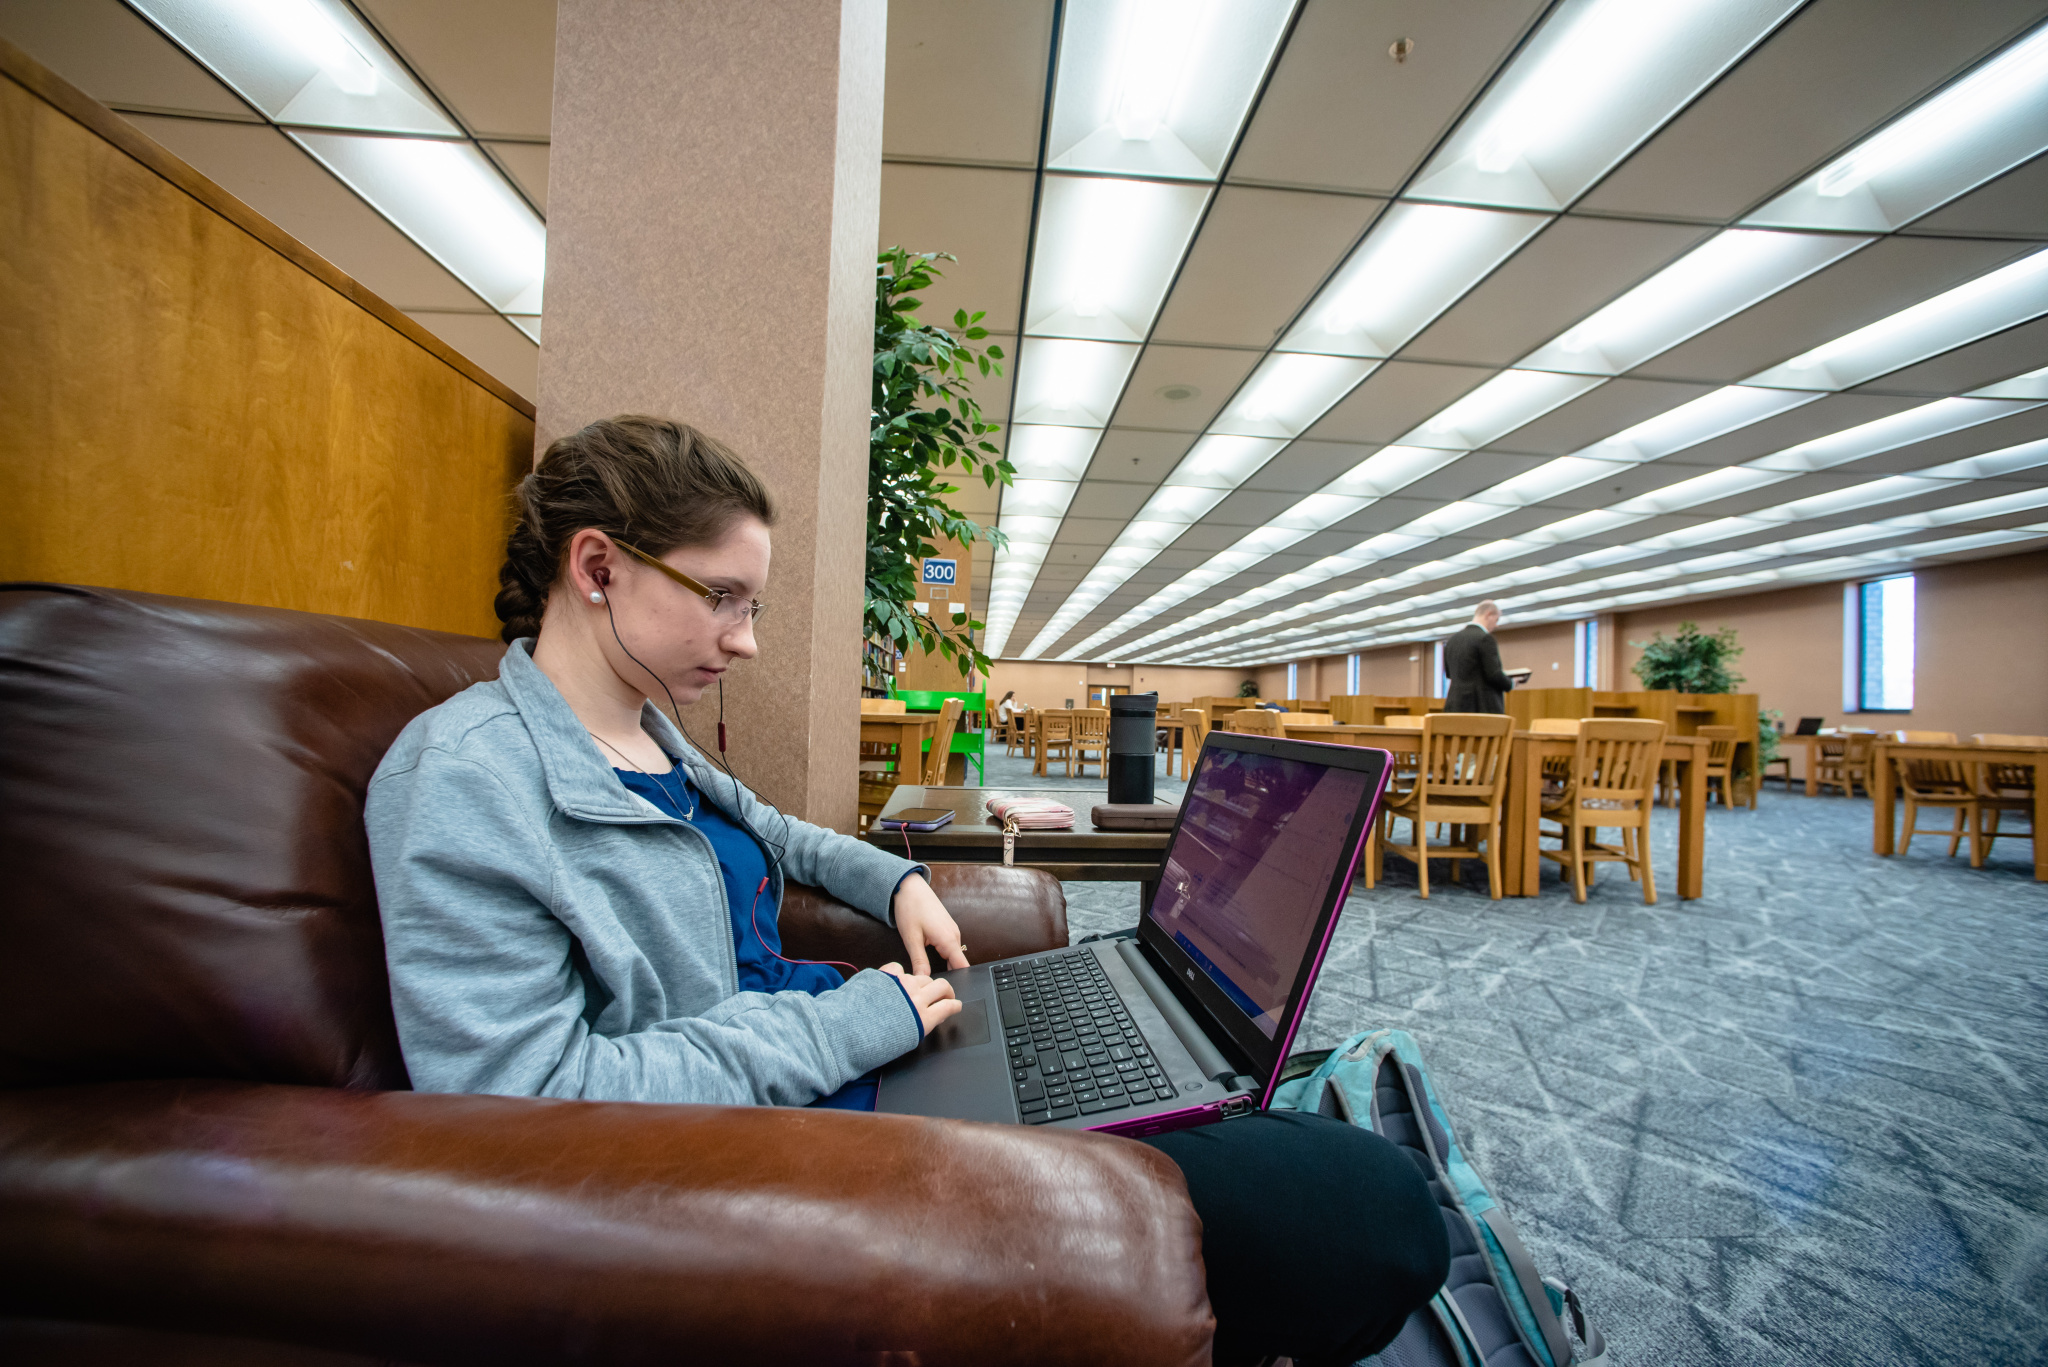 Student studying in the new library space, 2020 (Photo by Derek Eckenroth)